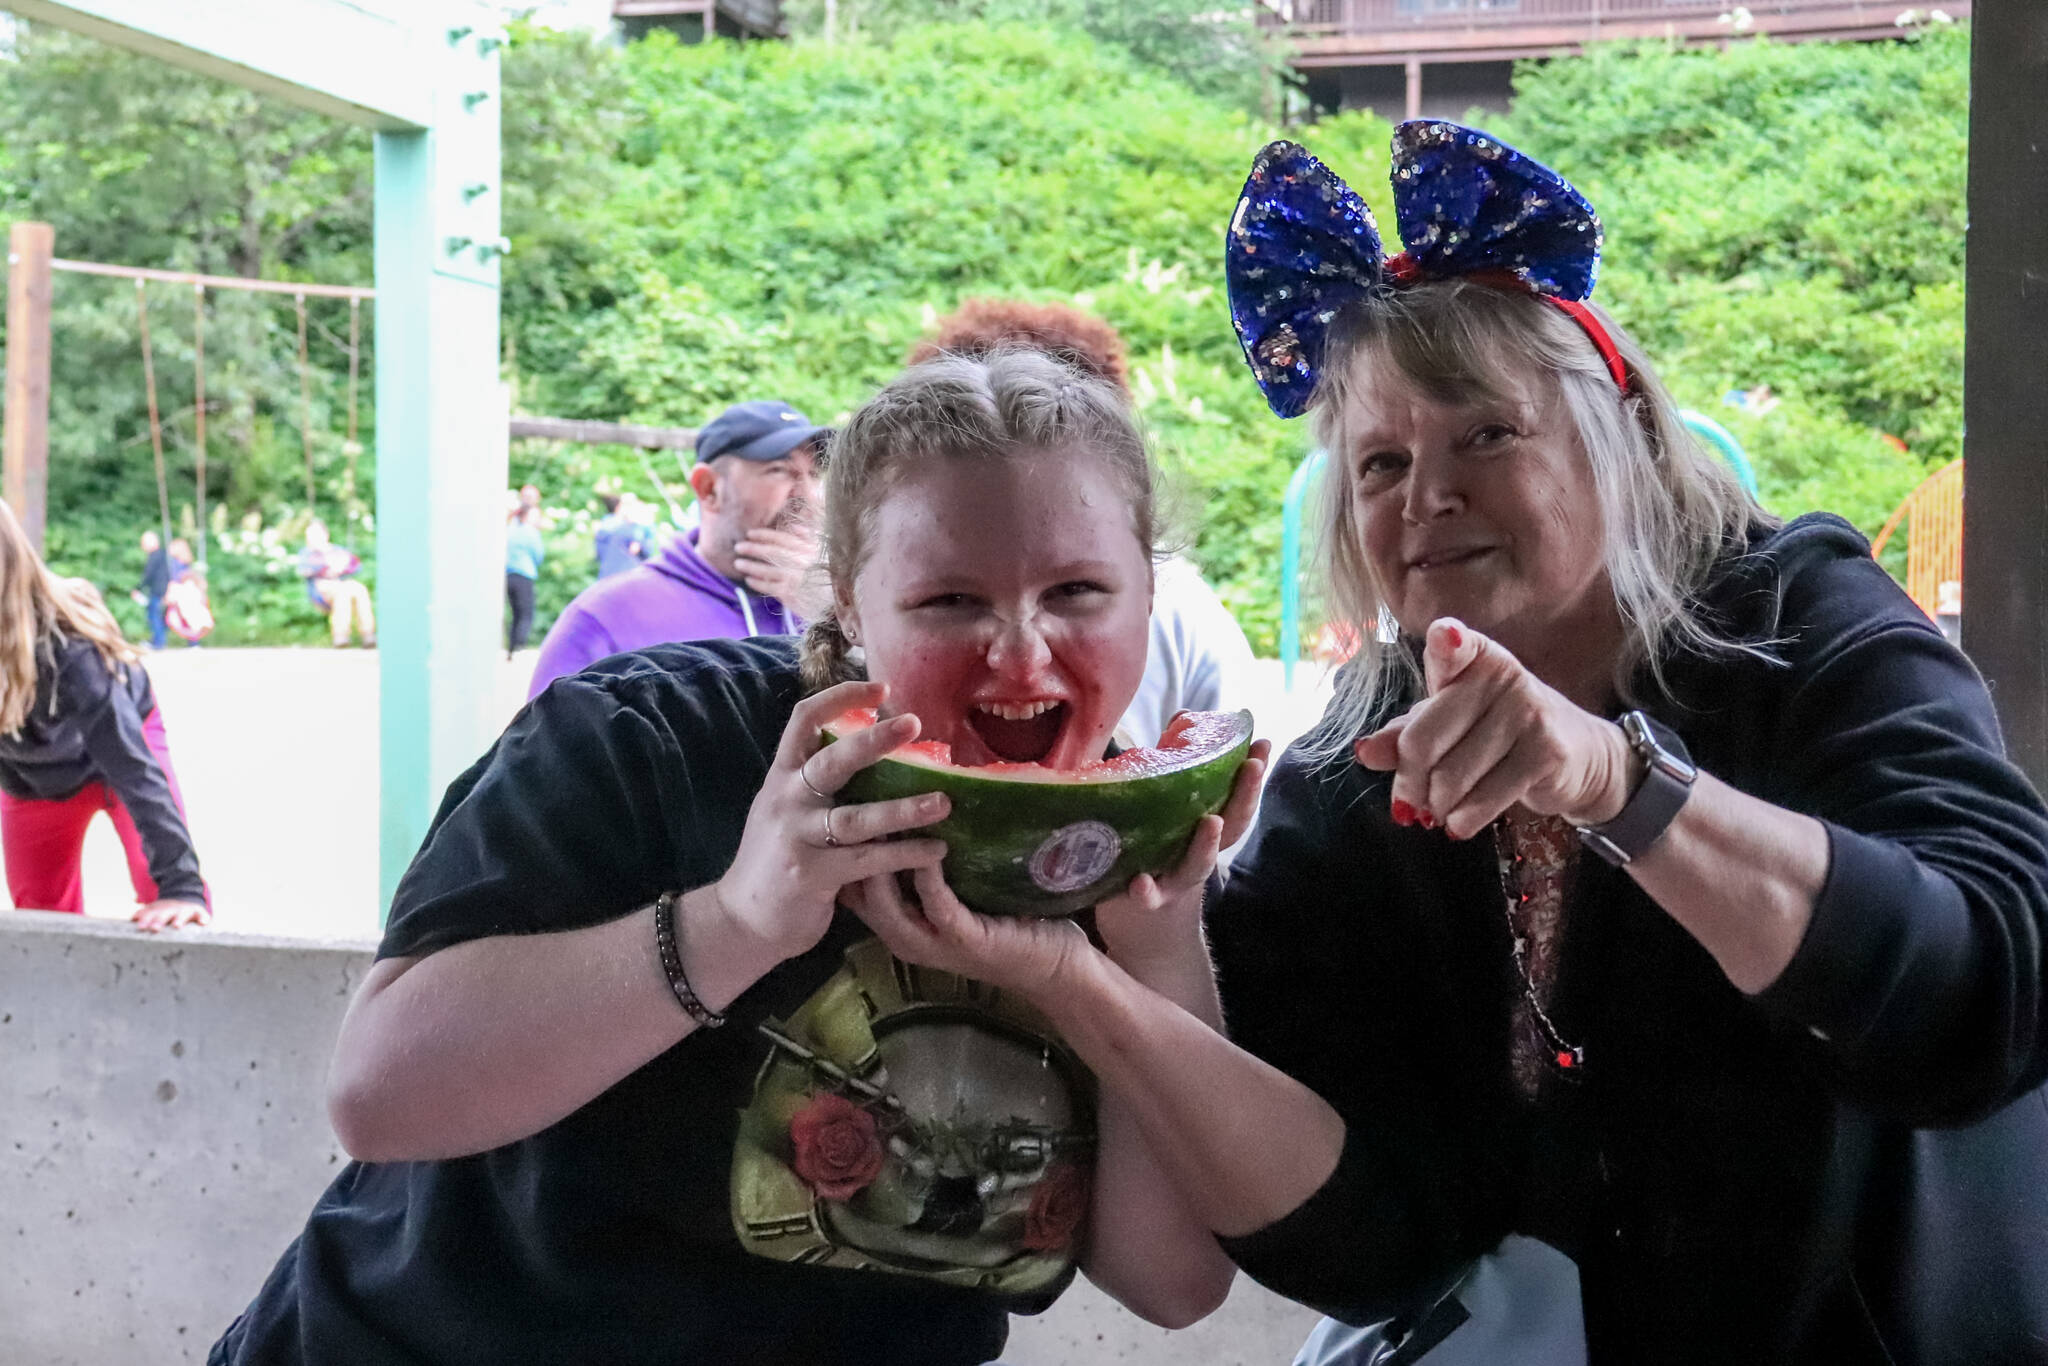 Brooklyn Kanouse (left) holds up her finished watermelon with pride at the watermelon-eating contest during the Douglas Fourth of July Committee’s annual community picnic Wednesday. (Jasz Garrett / Juneau Empire)